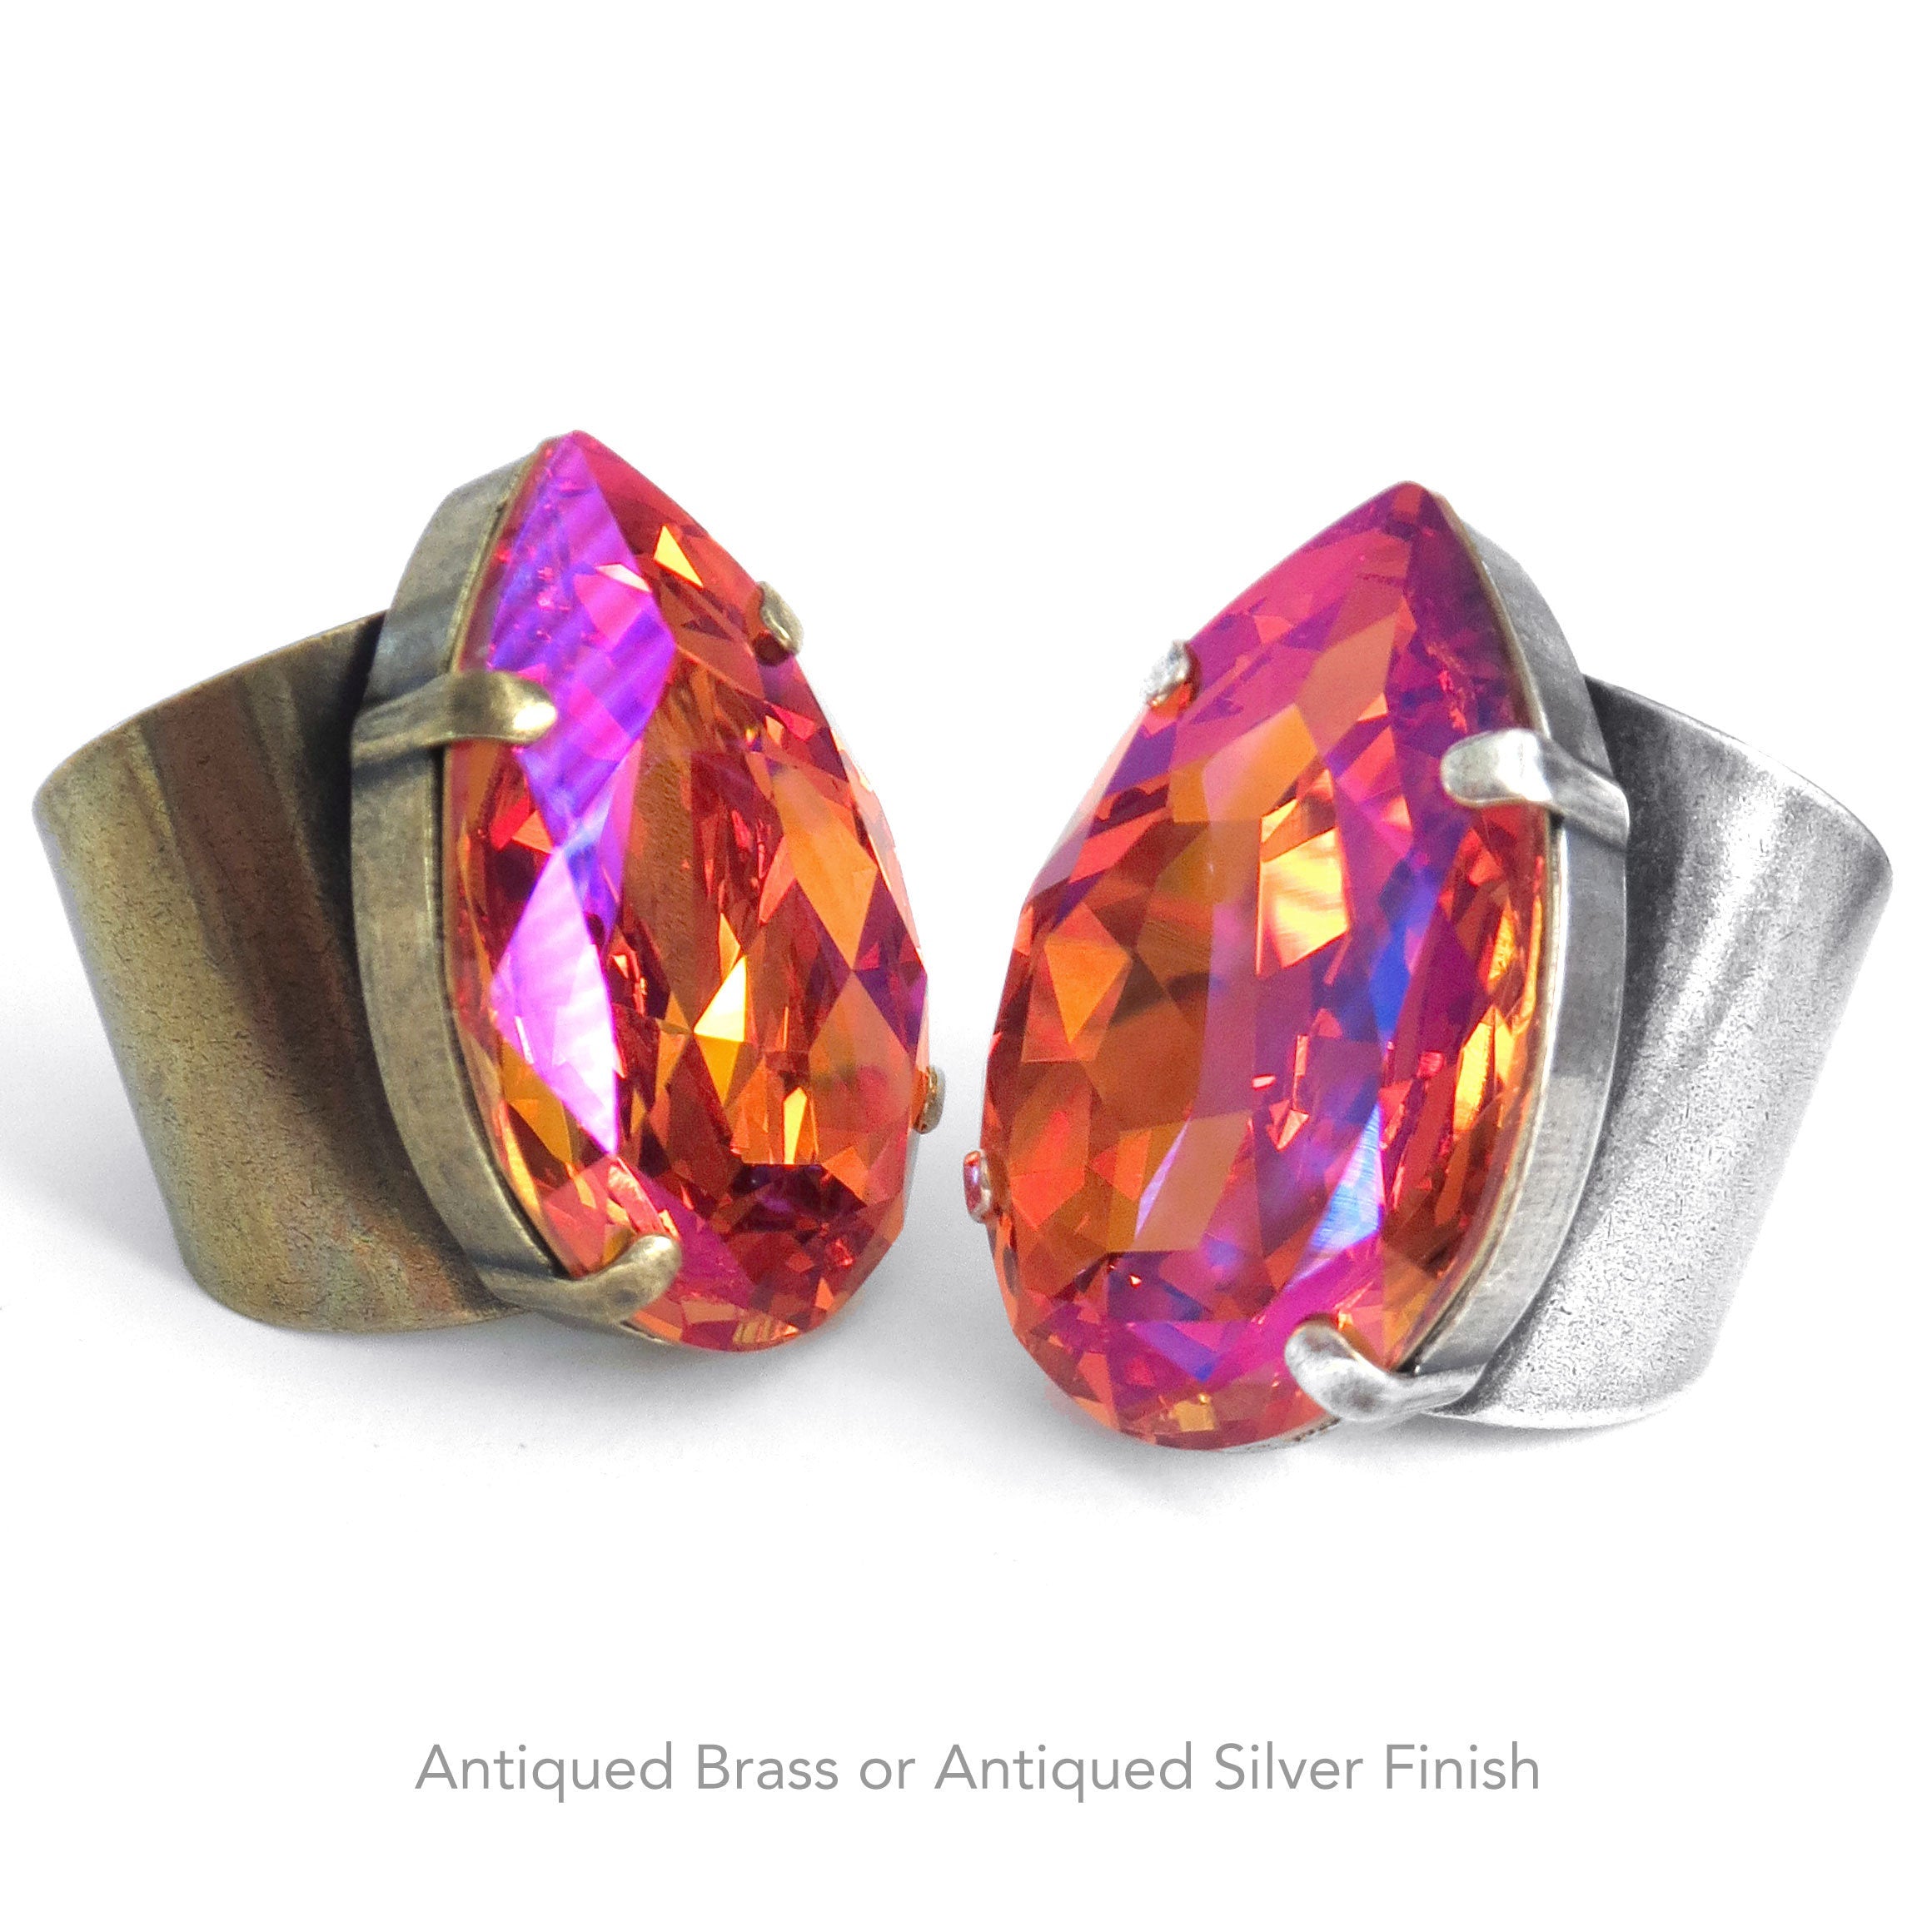 SULTRY SUNSET - Brilliant Orange & Hot Pink Crystal Ring with Teardrop Swarovski Crystal - Brilliant Bright Crystal Ring - Limited Edition